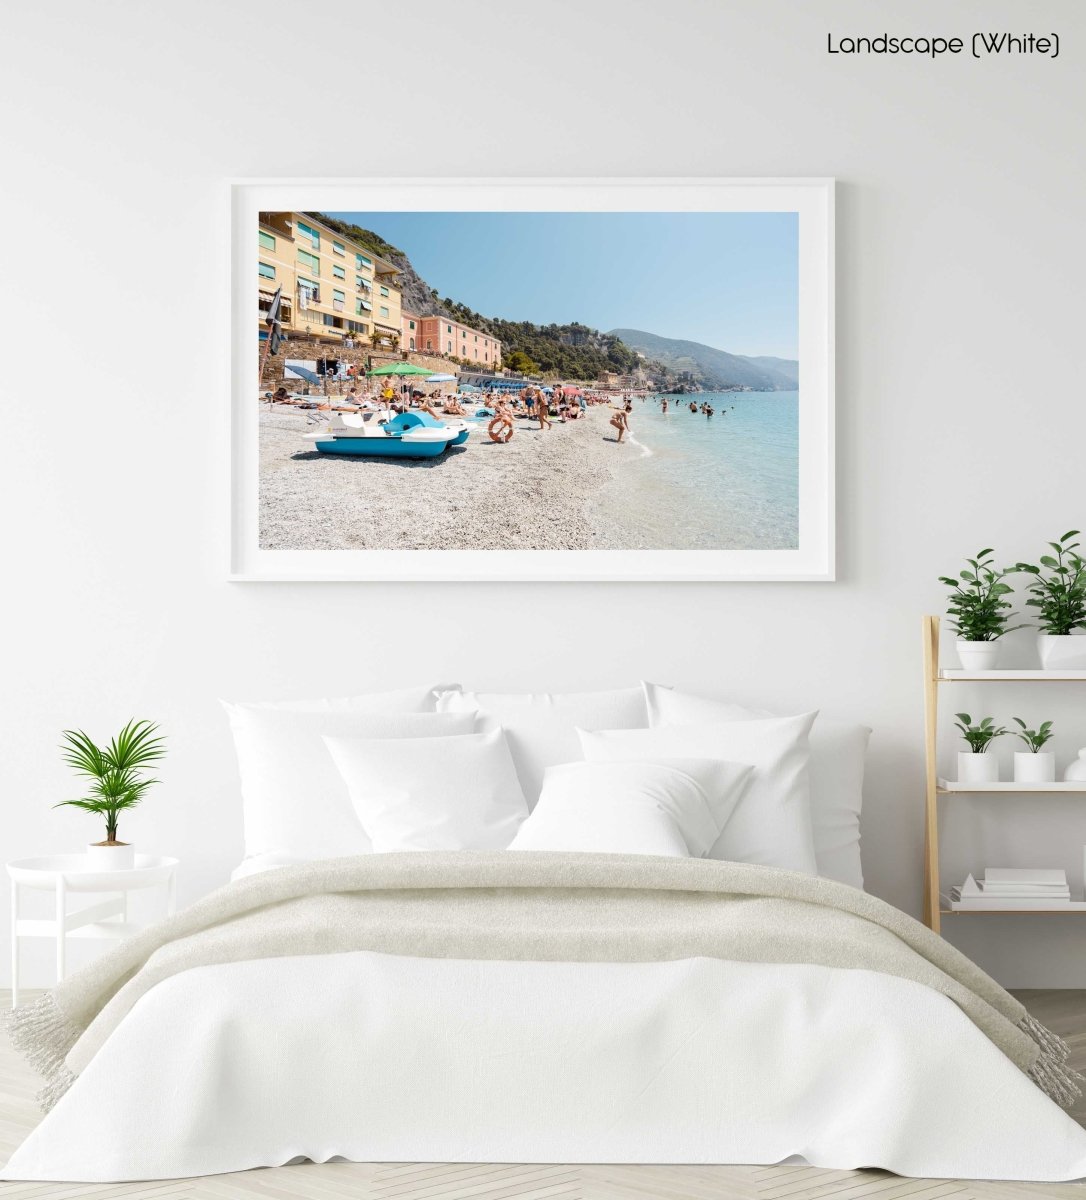 People swimming and lying on italian beach during summer in a white fine art frame